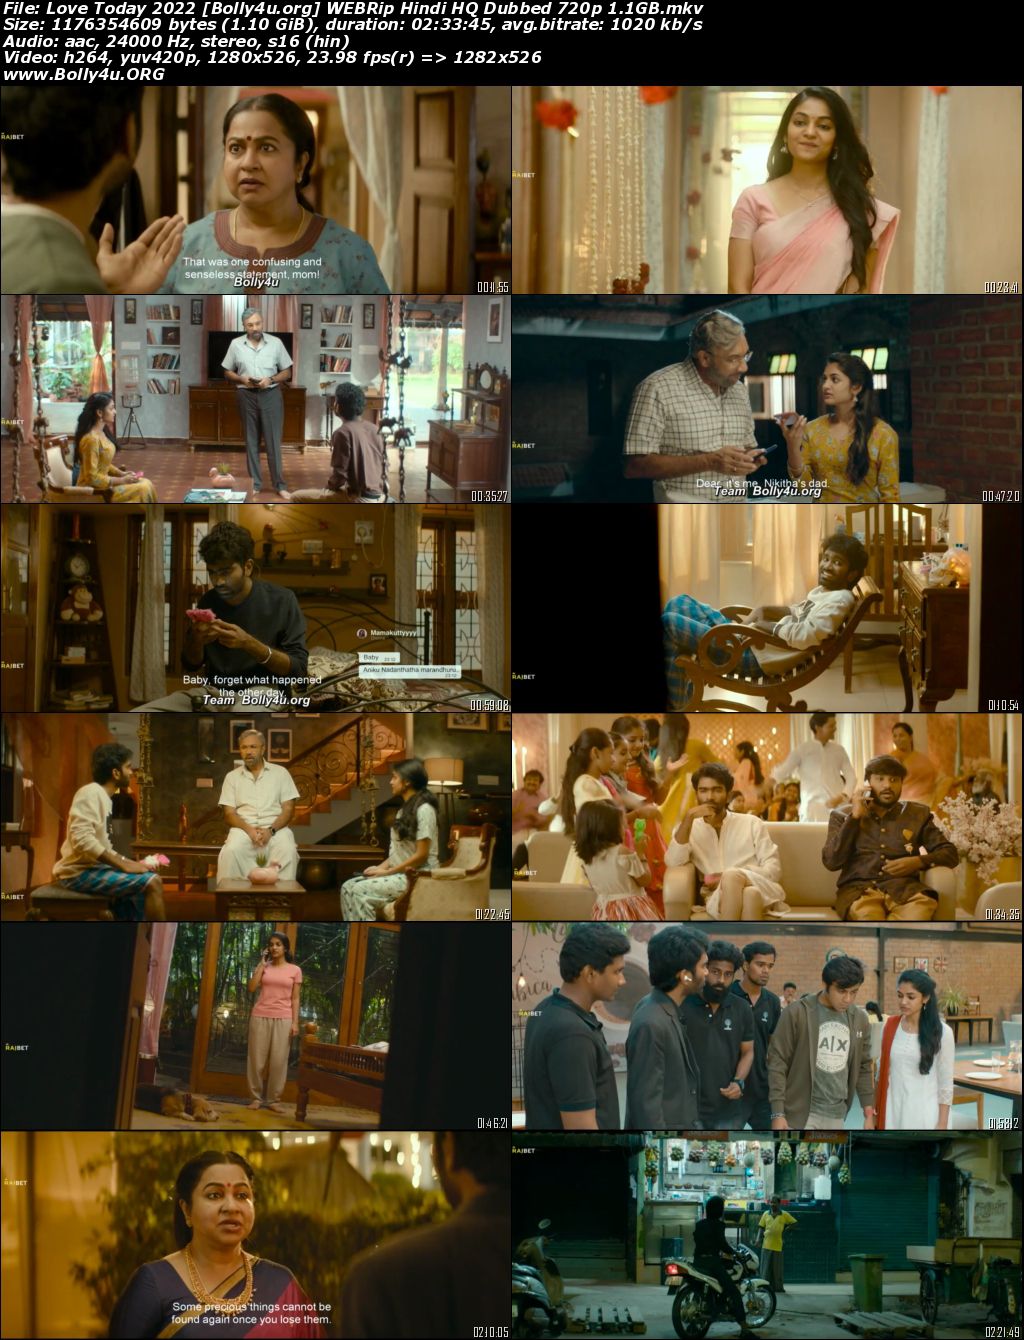 Love Today 2022 WEBRip Hindi HQ Dubbed Full Movie Download 1080p 720p 480p